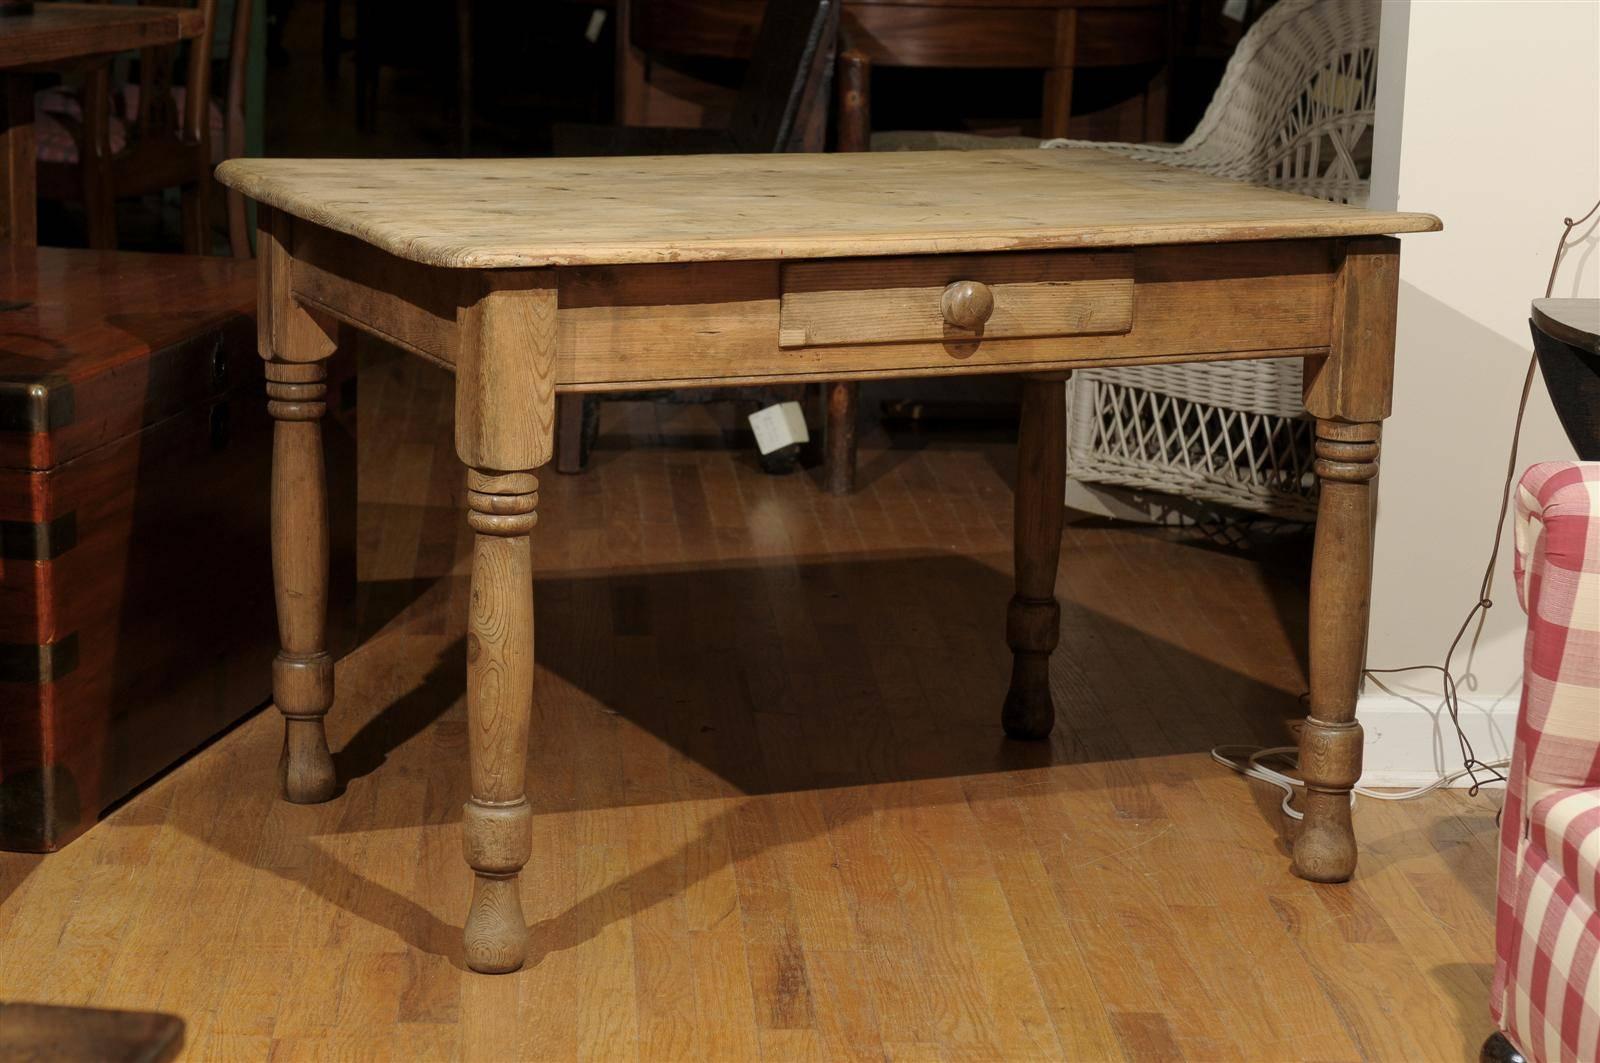 A nice pine table on turned legs that could be used as a work table, a desk or even a sofa table. It has one center drawer with a wooden knob.